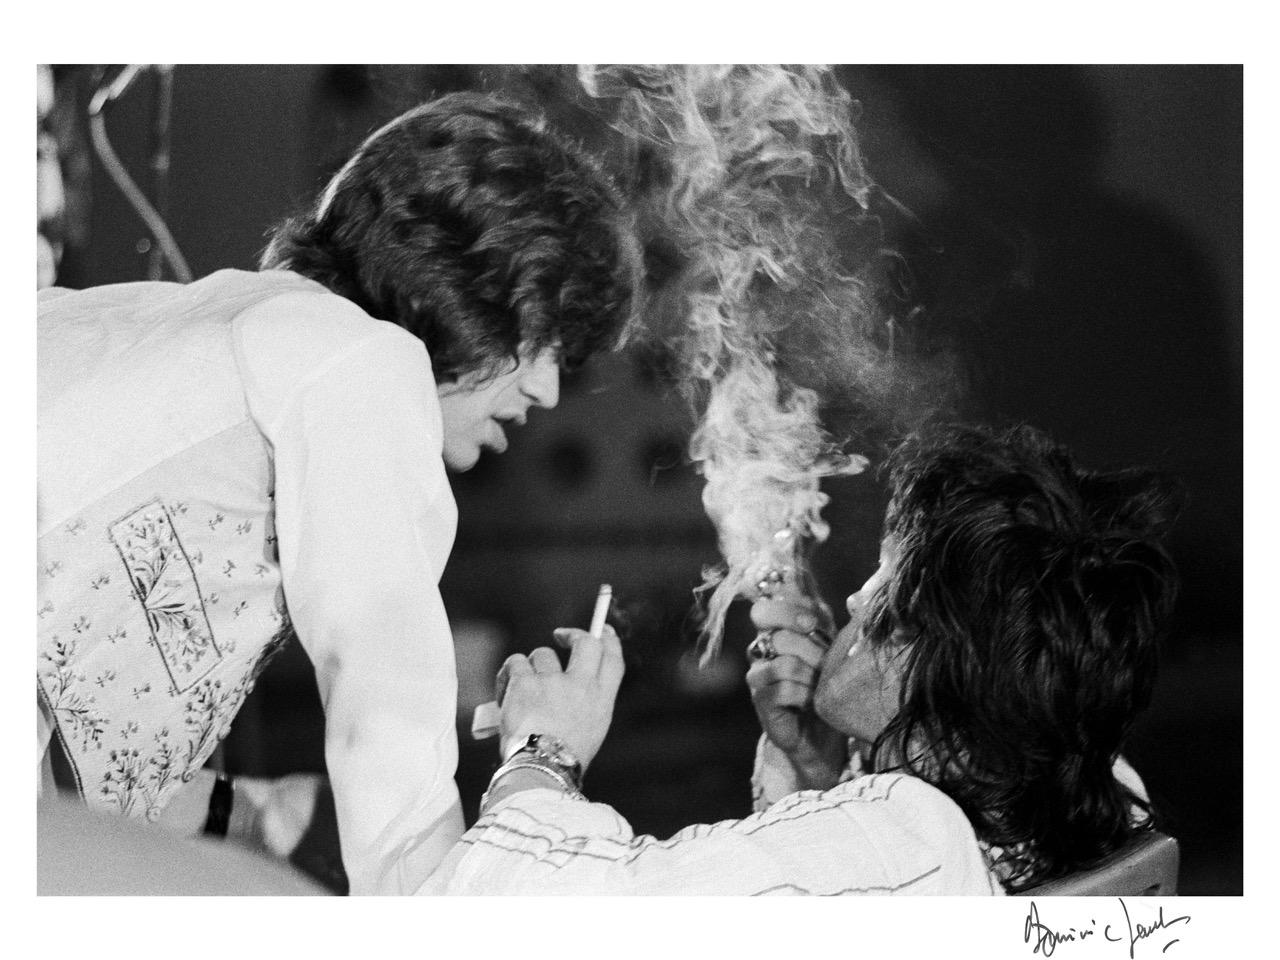 Dominic Lamblin Black and White Photograph - Getting   high !!!  Mick Jagger and Keith Richards 